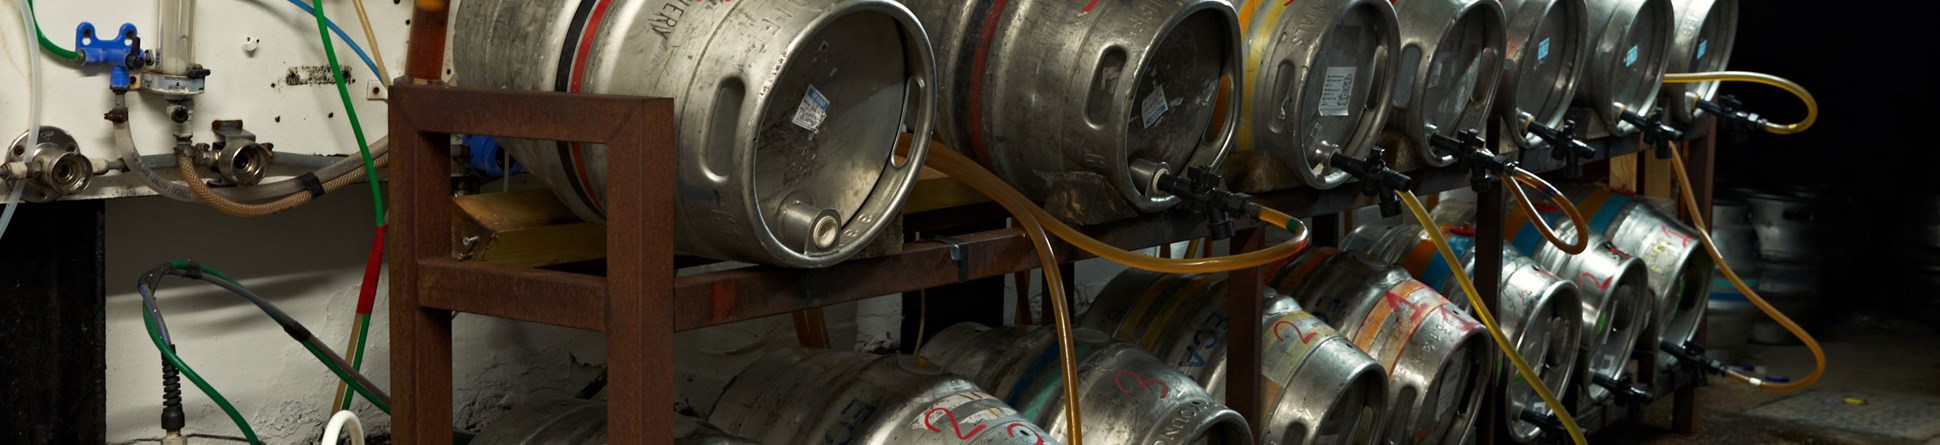 Rows of beer kegs stored in the back of a pub